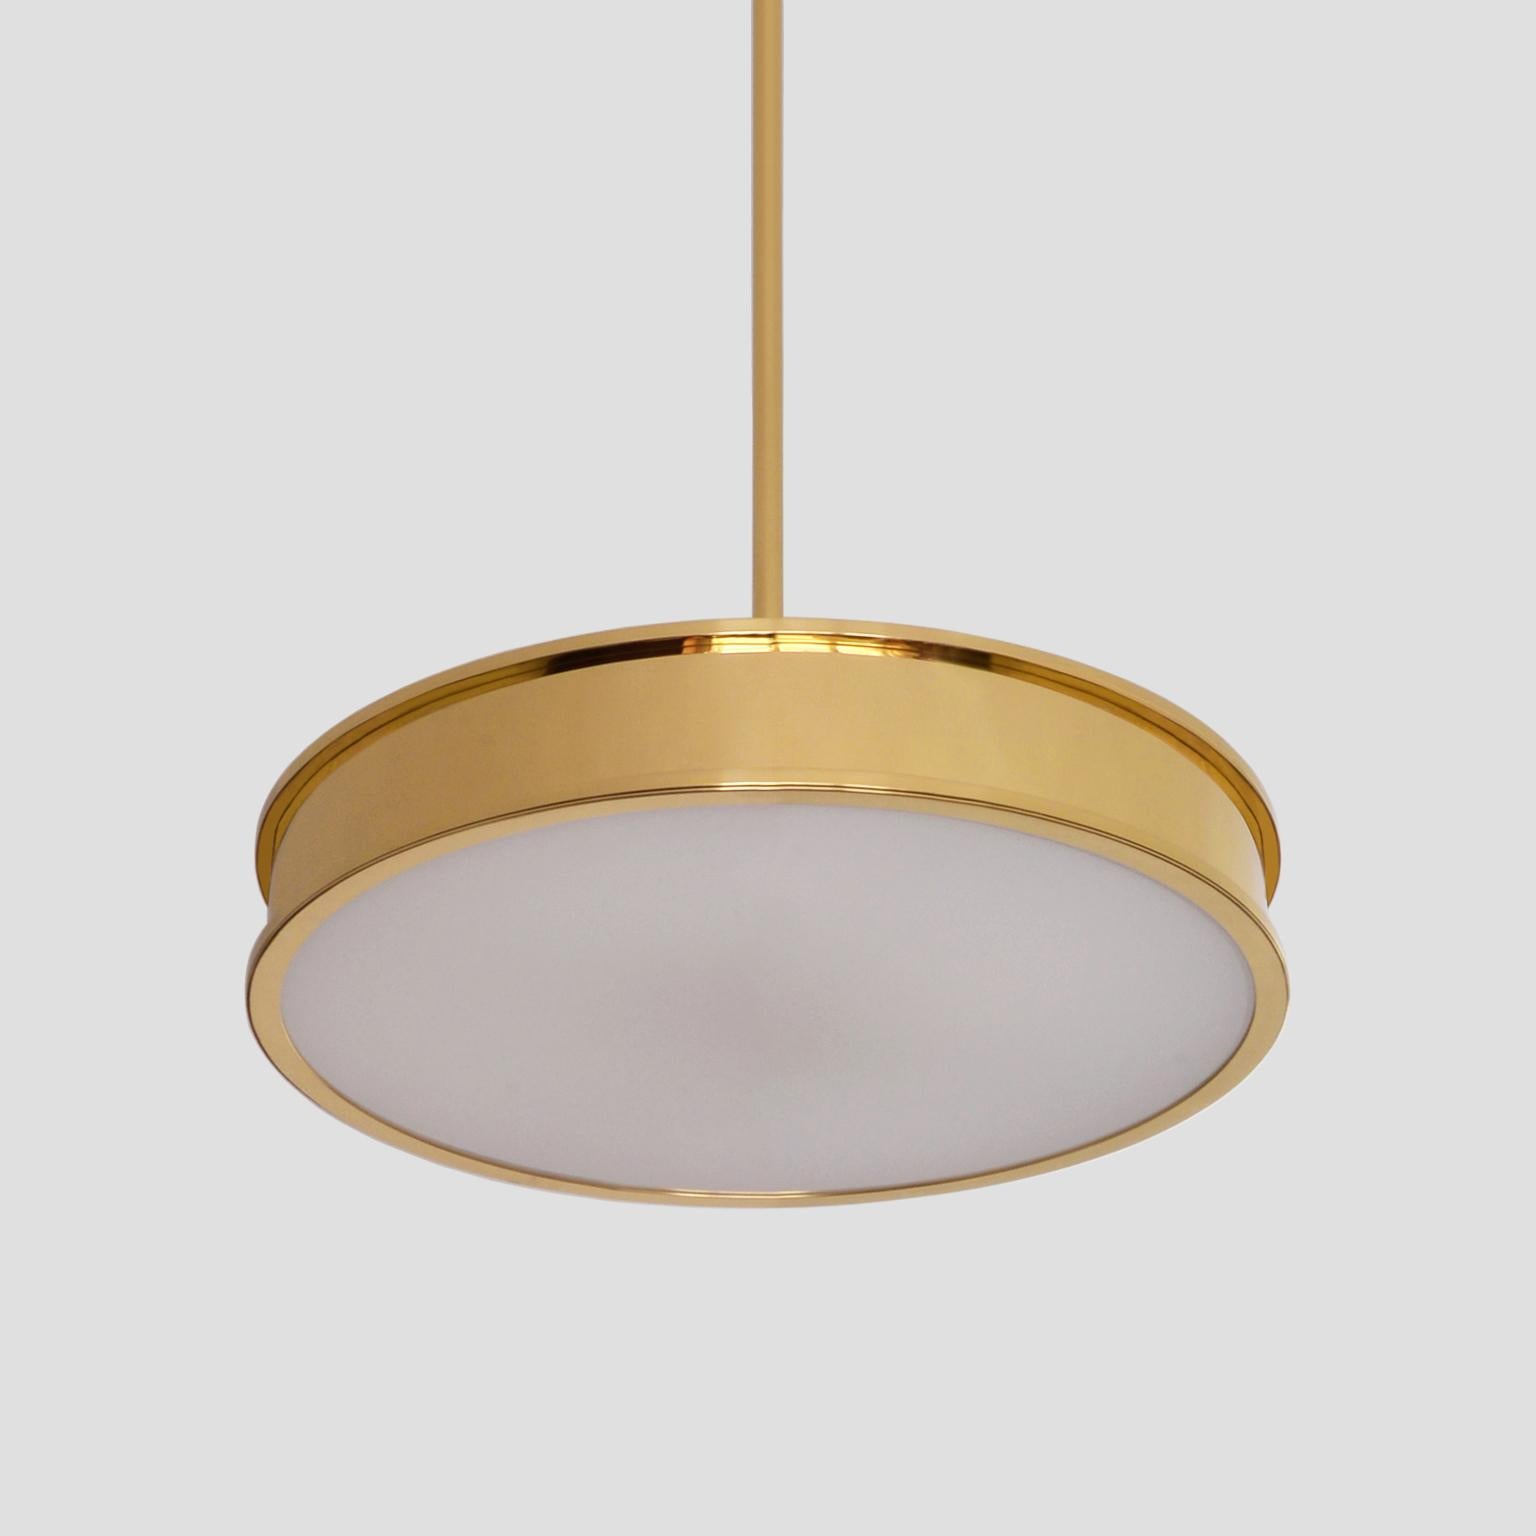 German Bespoke Modernist Circular Pendant Light in Polished Brass and Opal Glass, 2018 For Sale